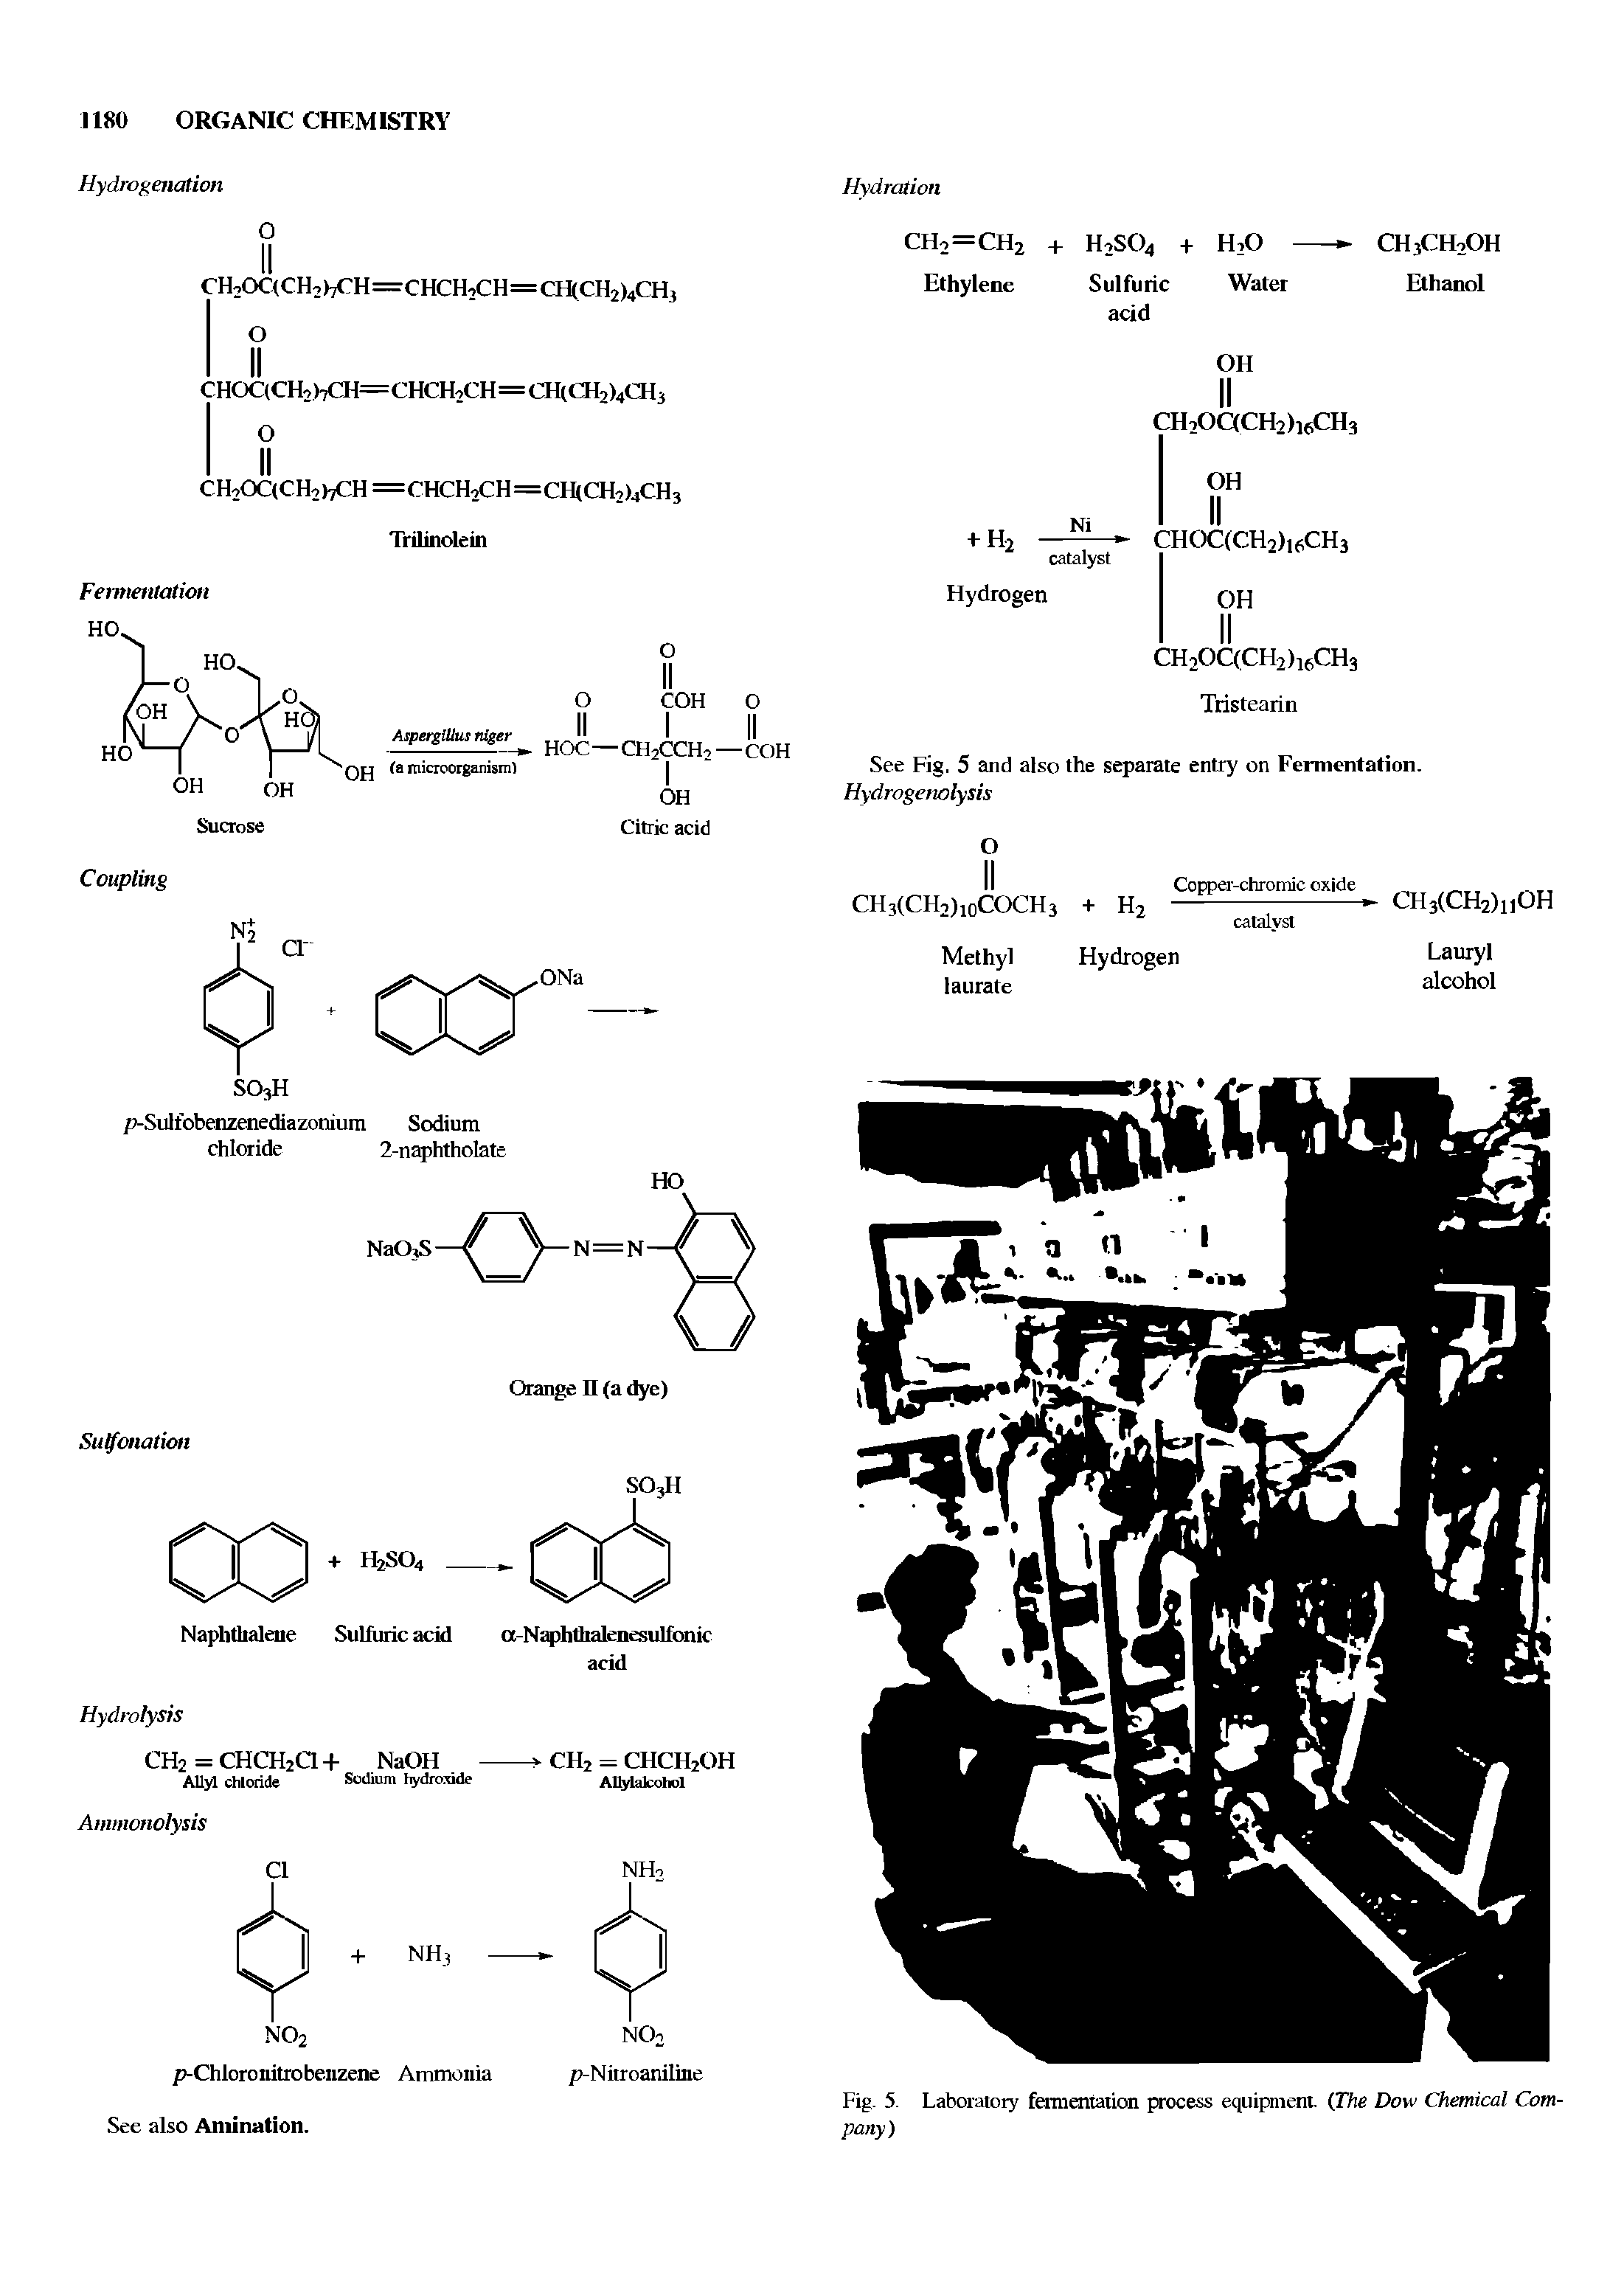 Fig. 5. Laboratory fermentation process equipment. (The Dow Chemical Company)...